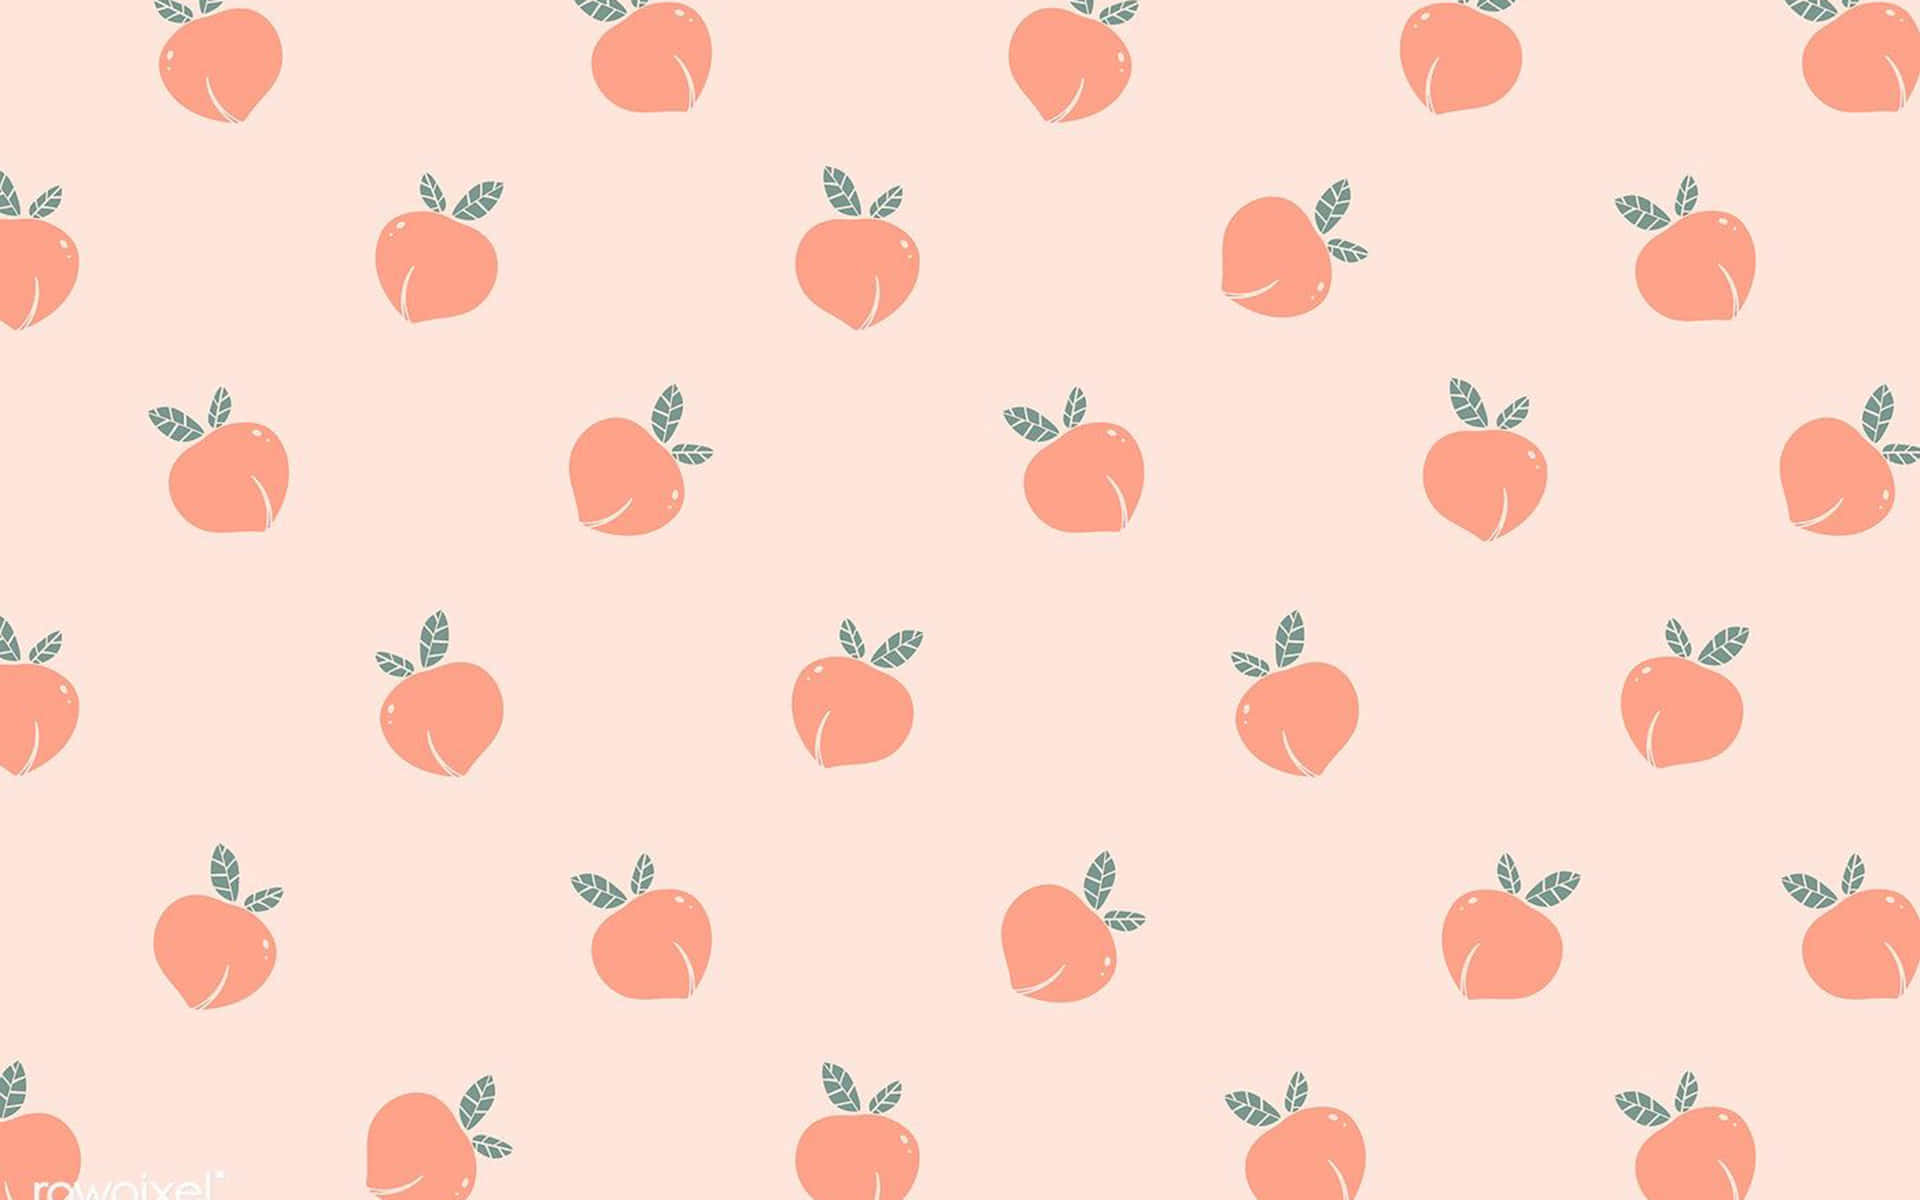 Cute and juicy peach perfect for snacking! Wallpaper